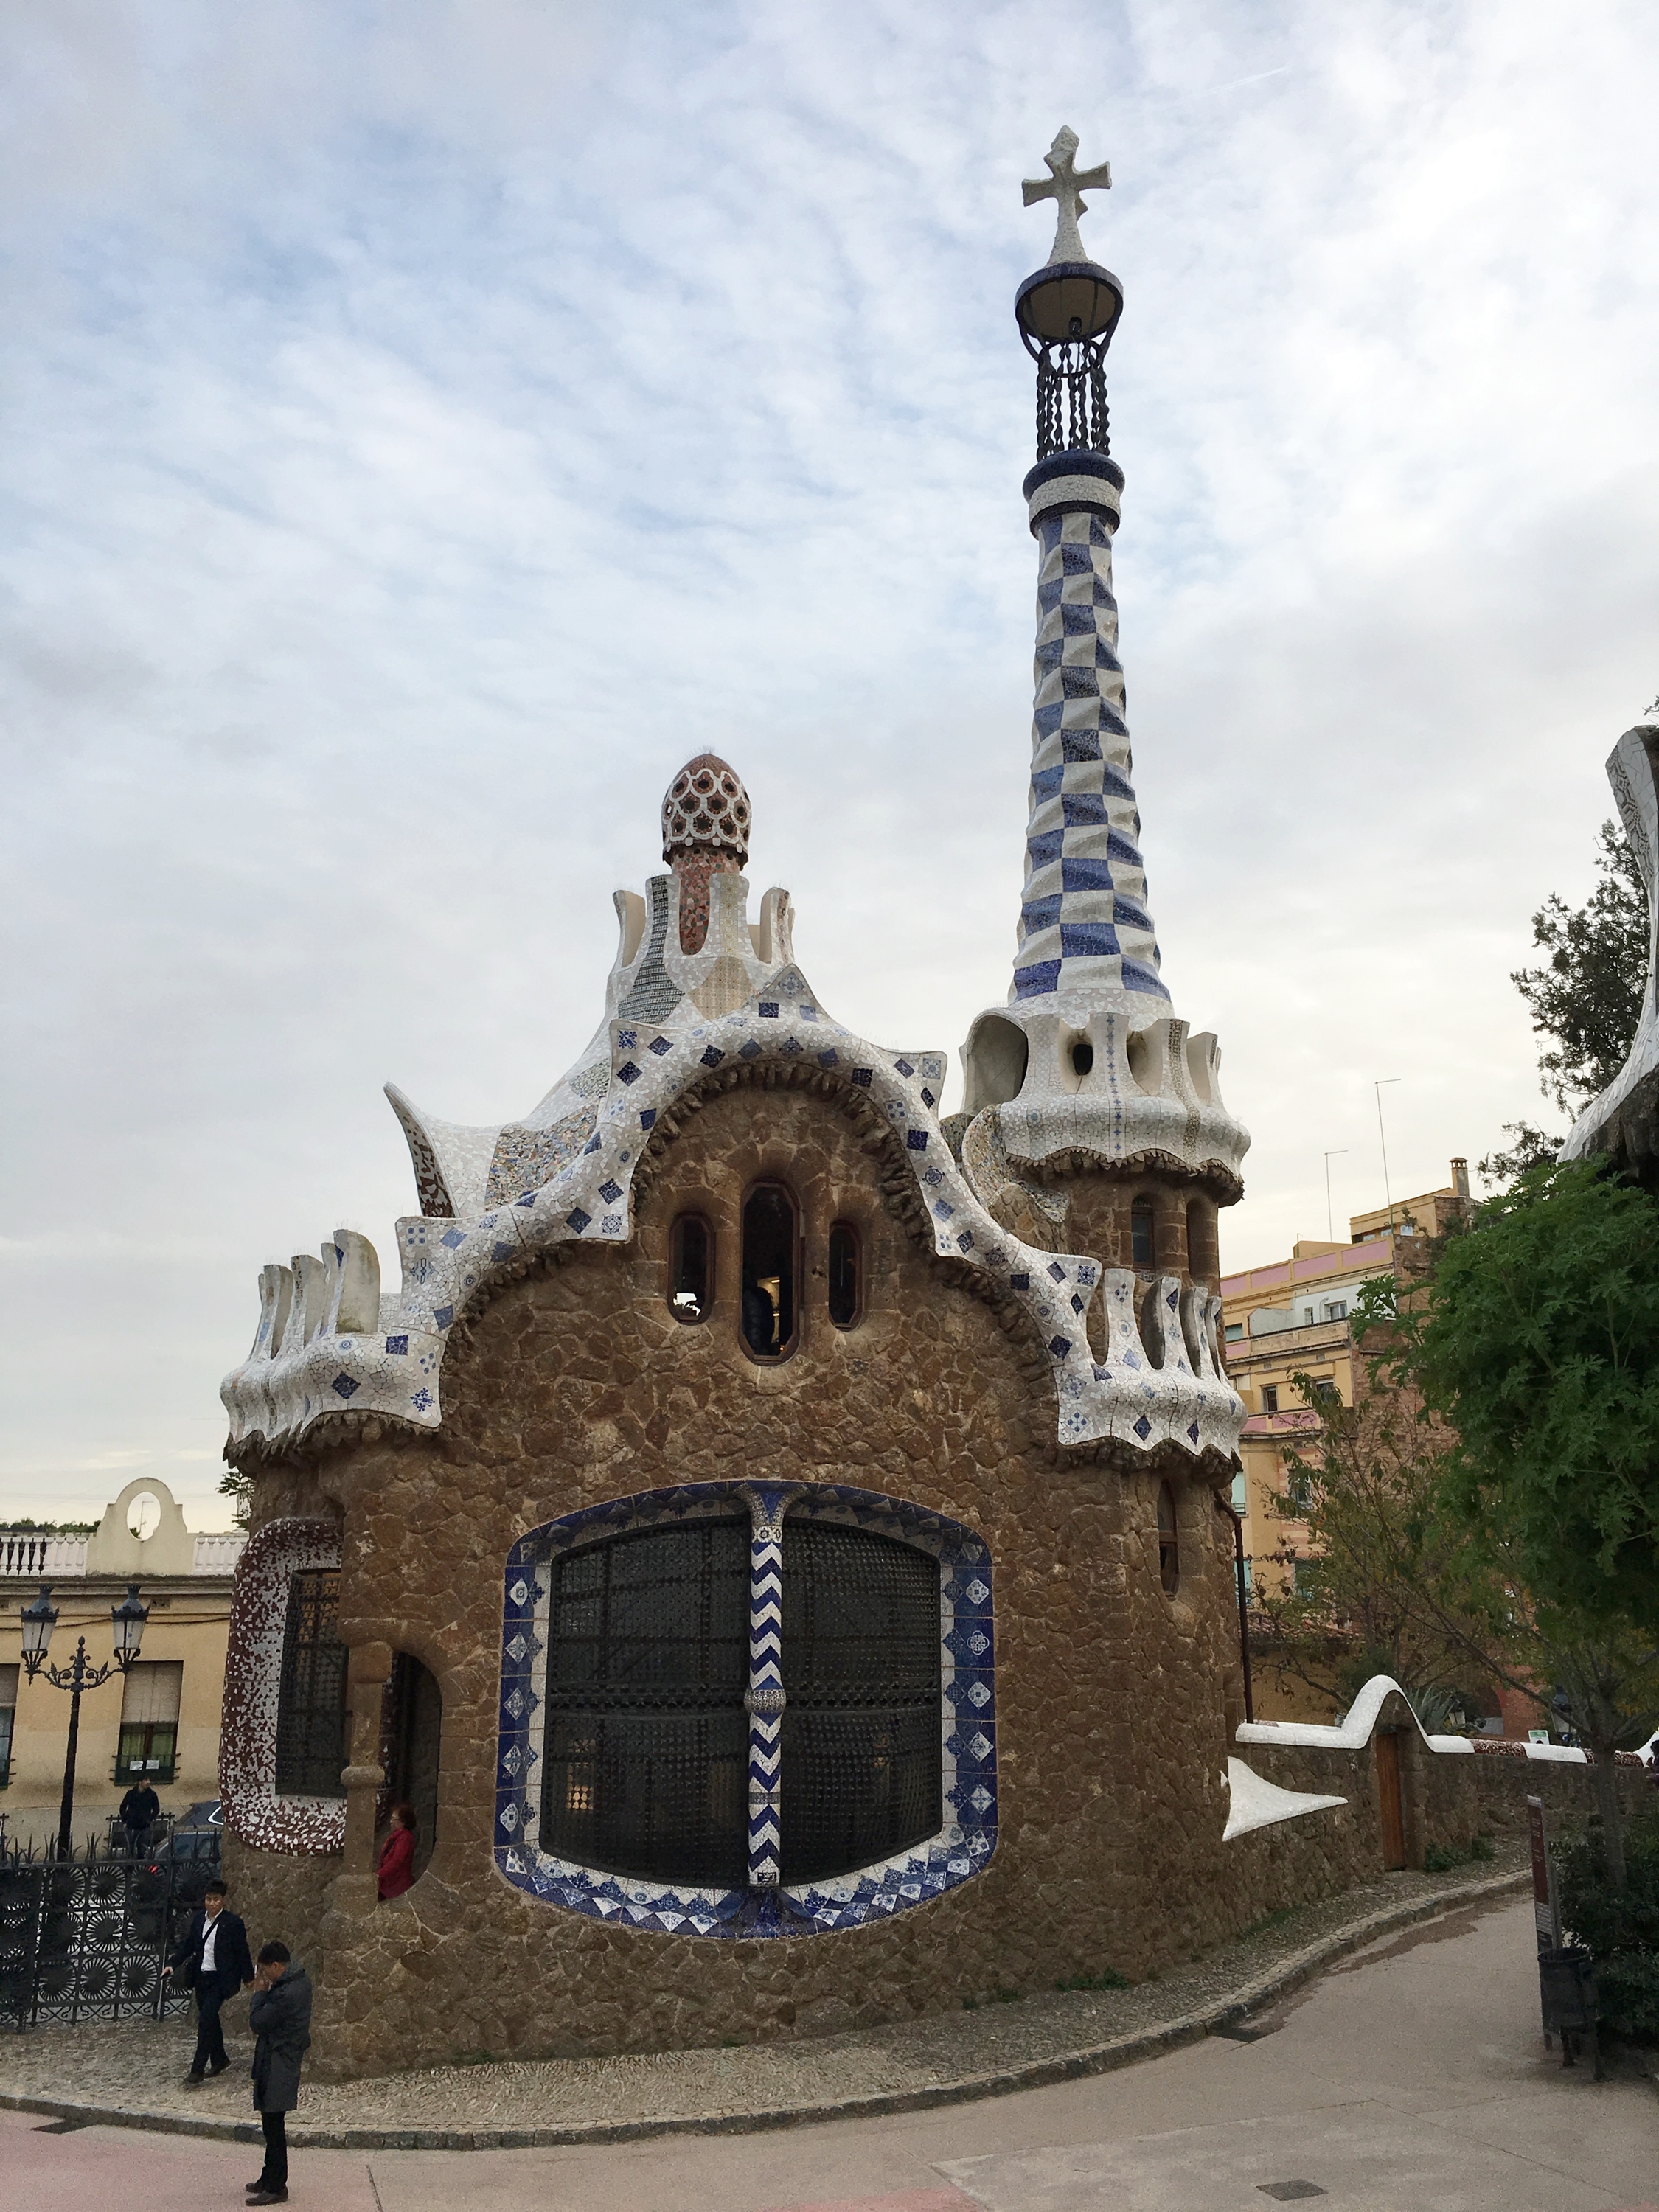 Quirky Gaudí building with a tower